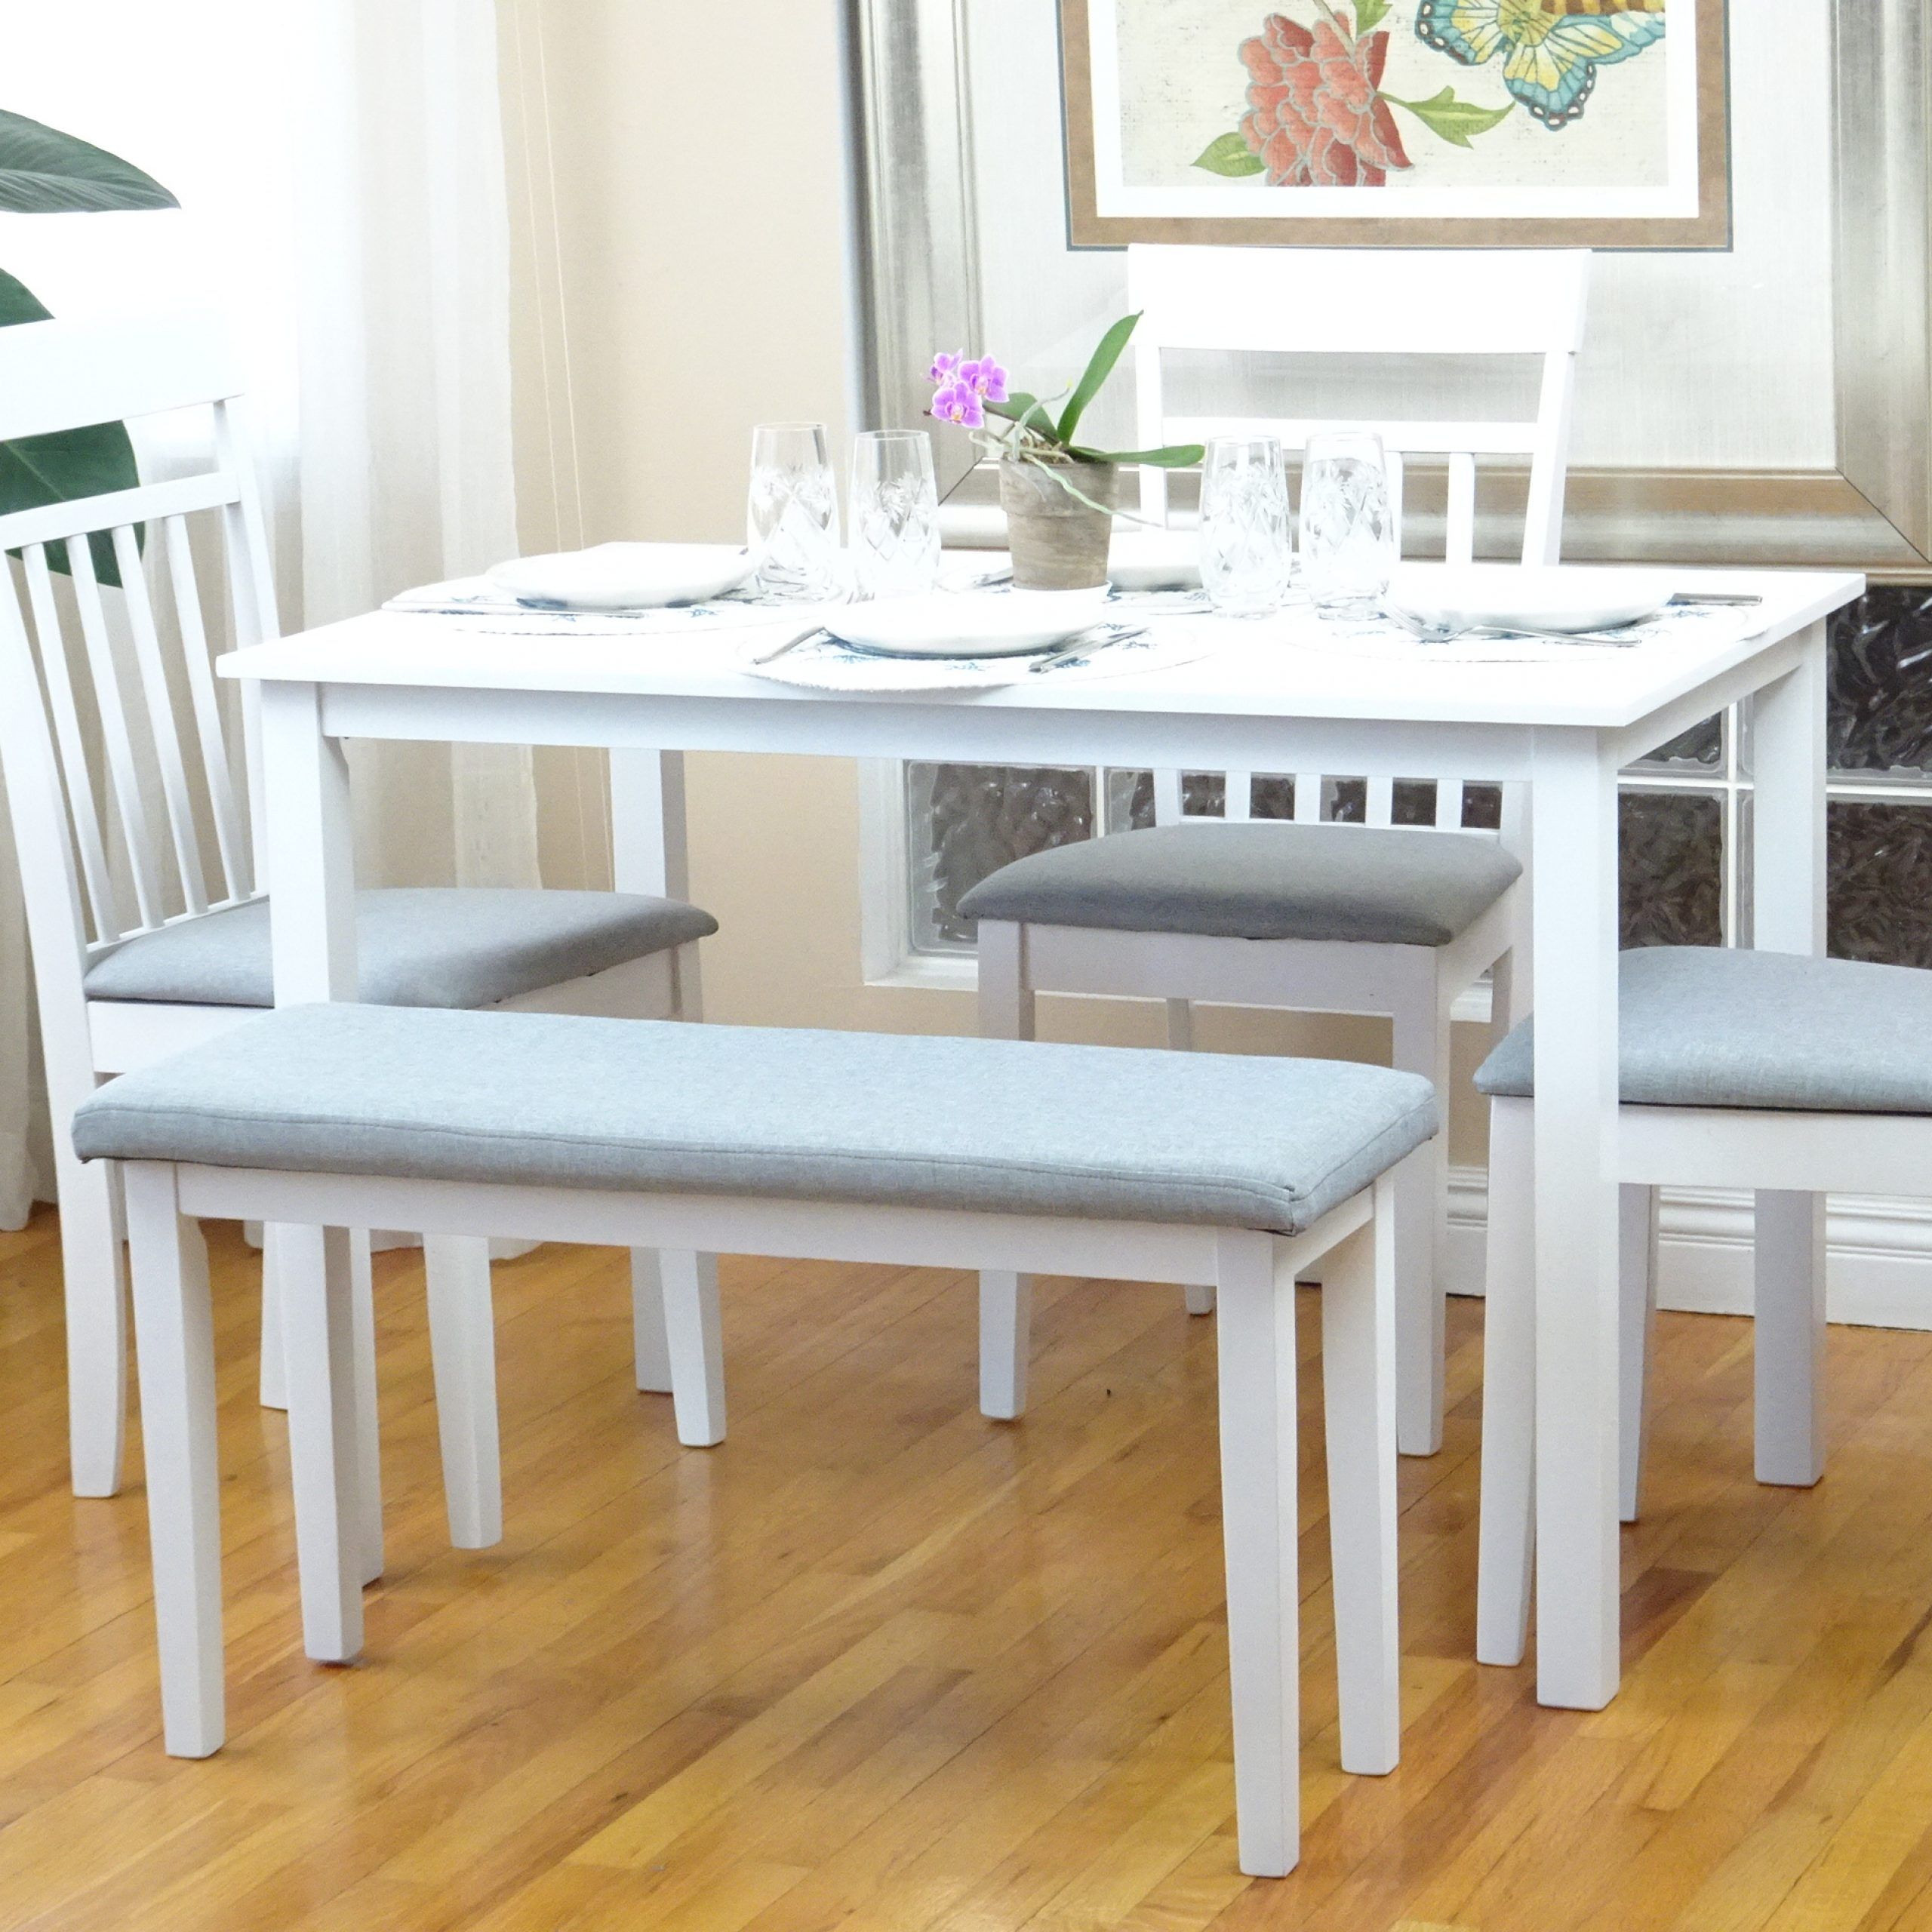 5 Pc Dining Kitchen Set Of Rectangular Table And 3 Chairs For Most Current White Rectangular Dining Tables (View 3 of 15)